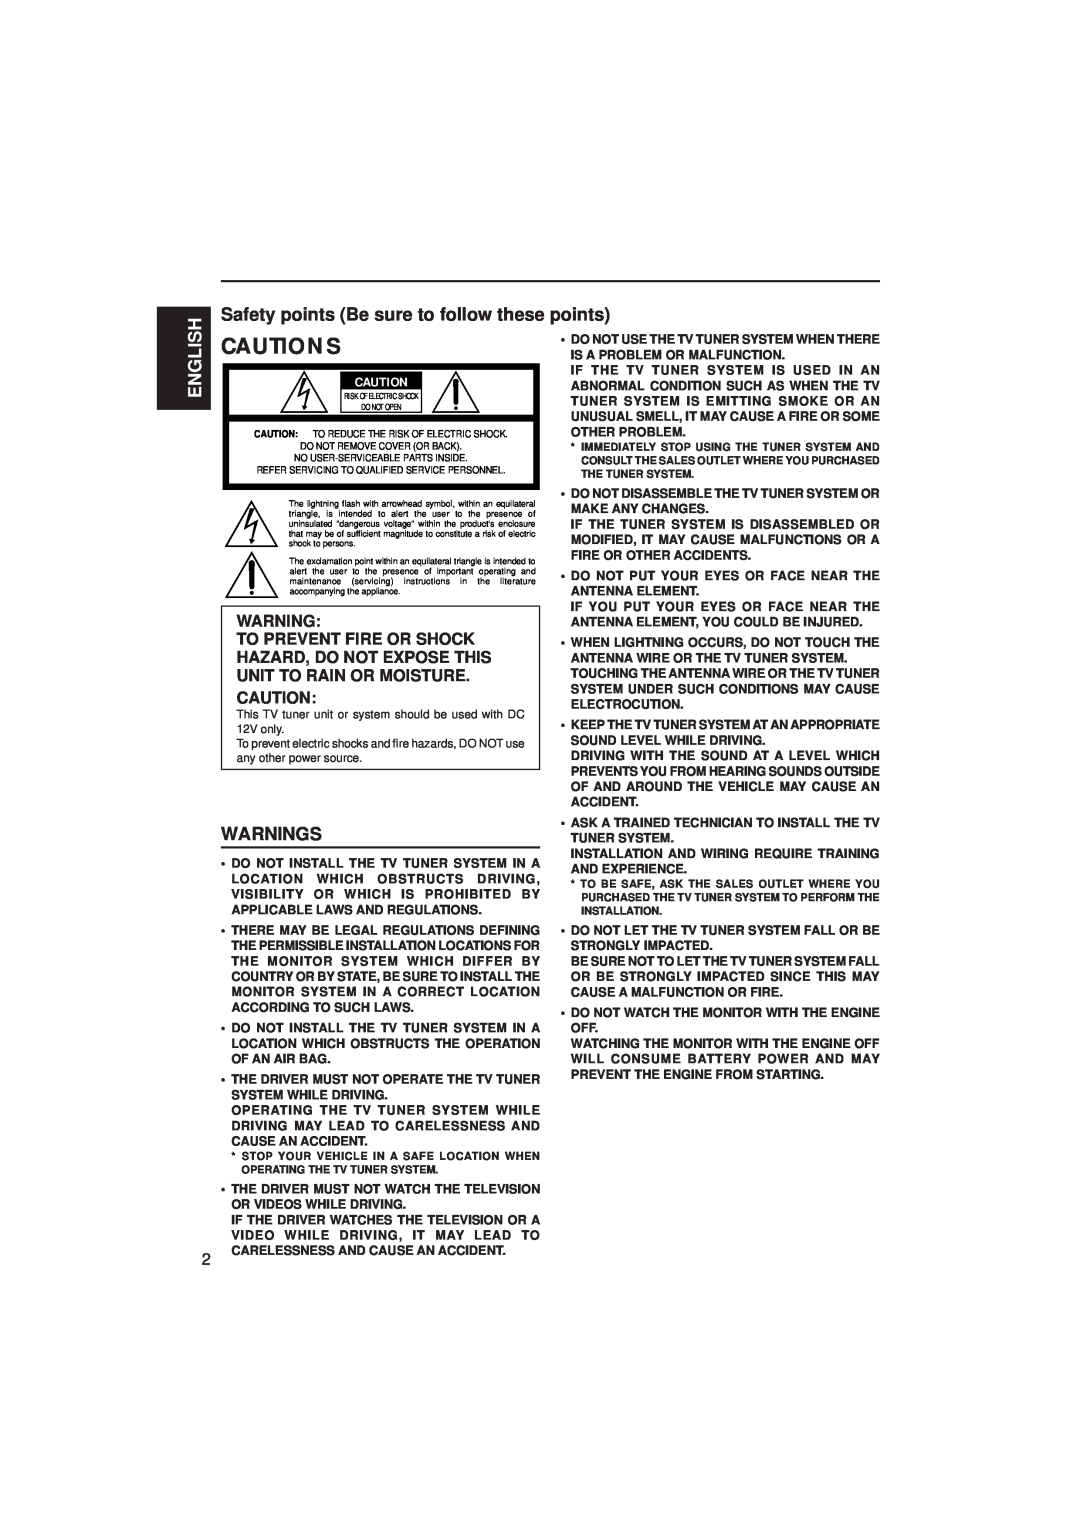 JVC KV-C10 manual Safety points Be sure to follow these points, Warnings, Cautions, English 